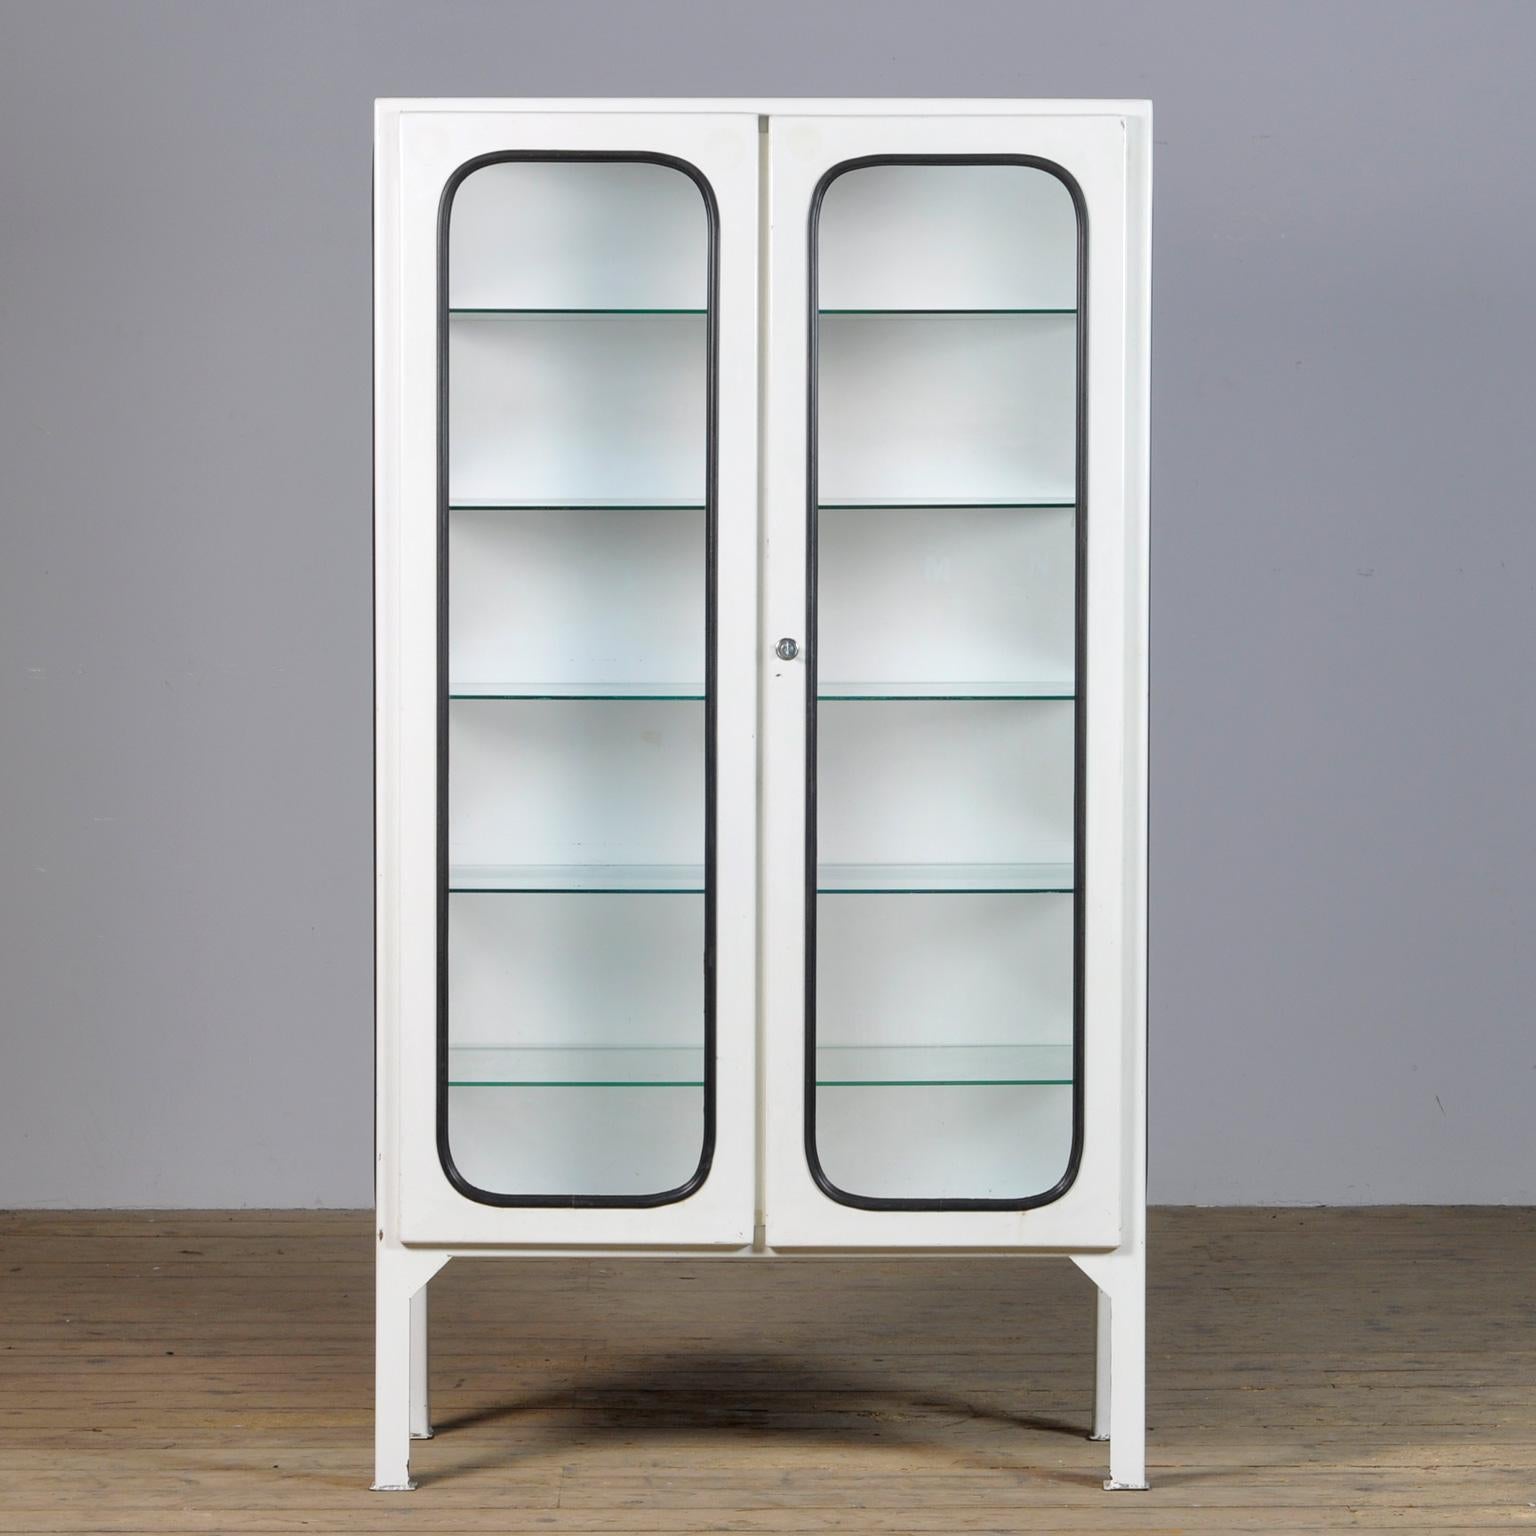 This medical cabinet was designed in the 1970s and was produced circa 1975 in hungary. It has been used in a hostital in Budapest were it was used to store medical equipment. It is made from iron and glass, and the glass is held by a black rubber